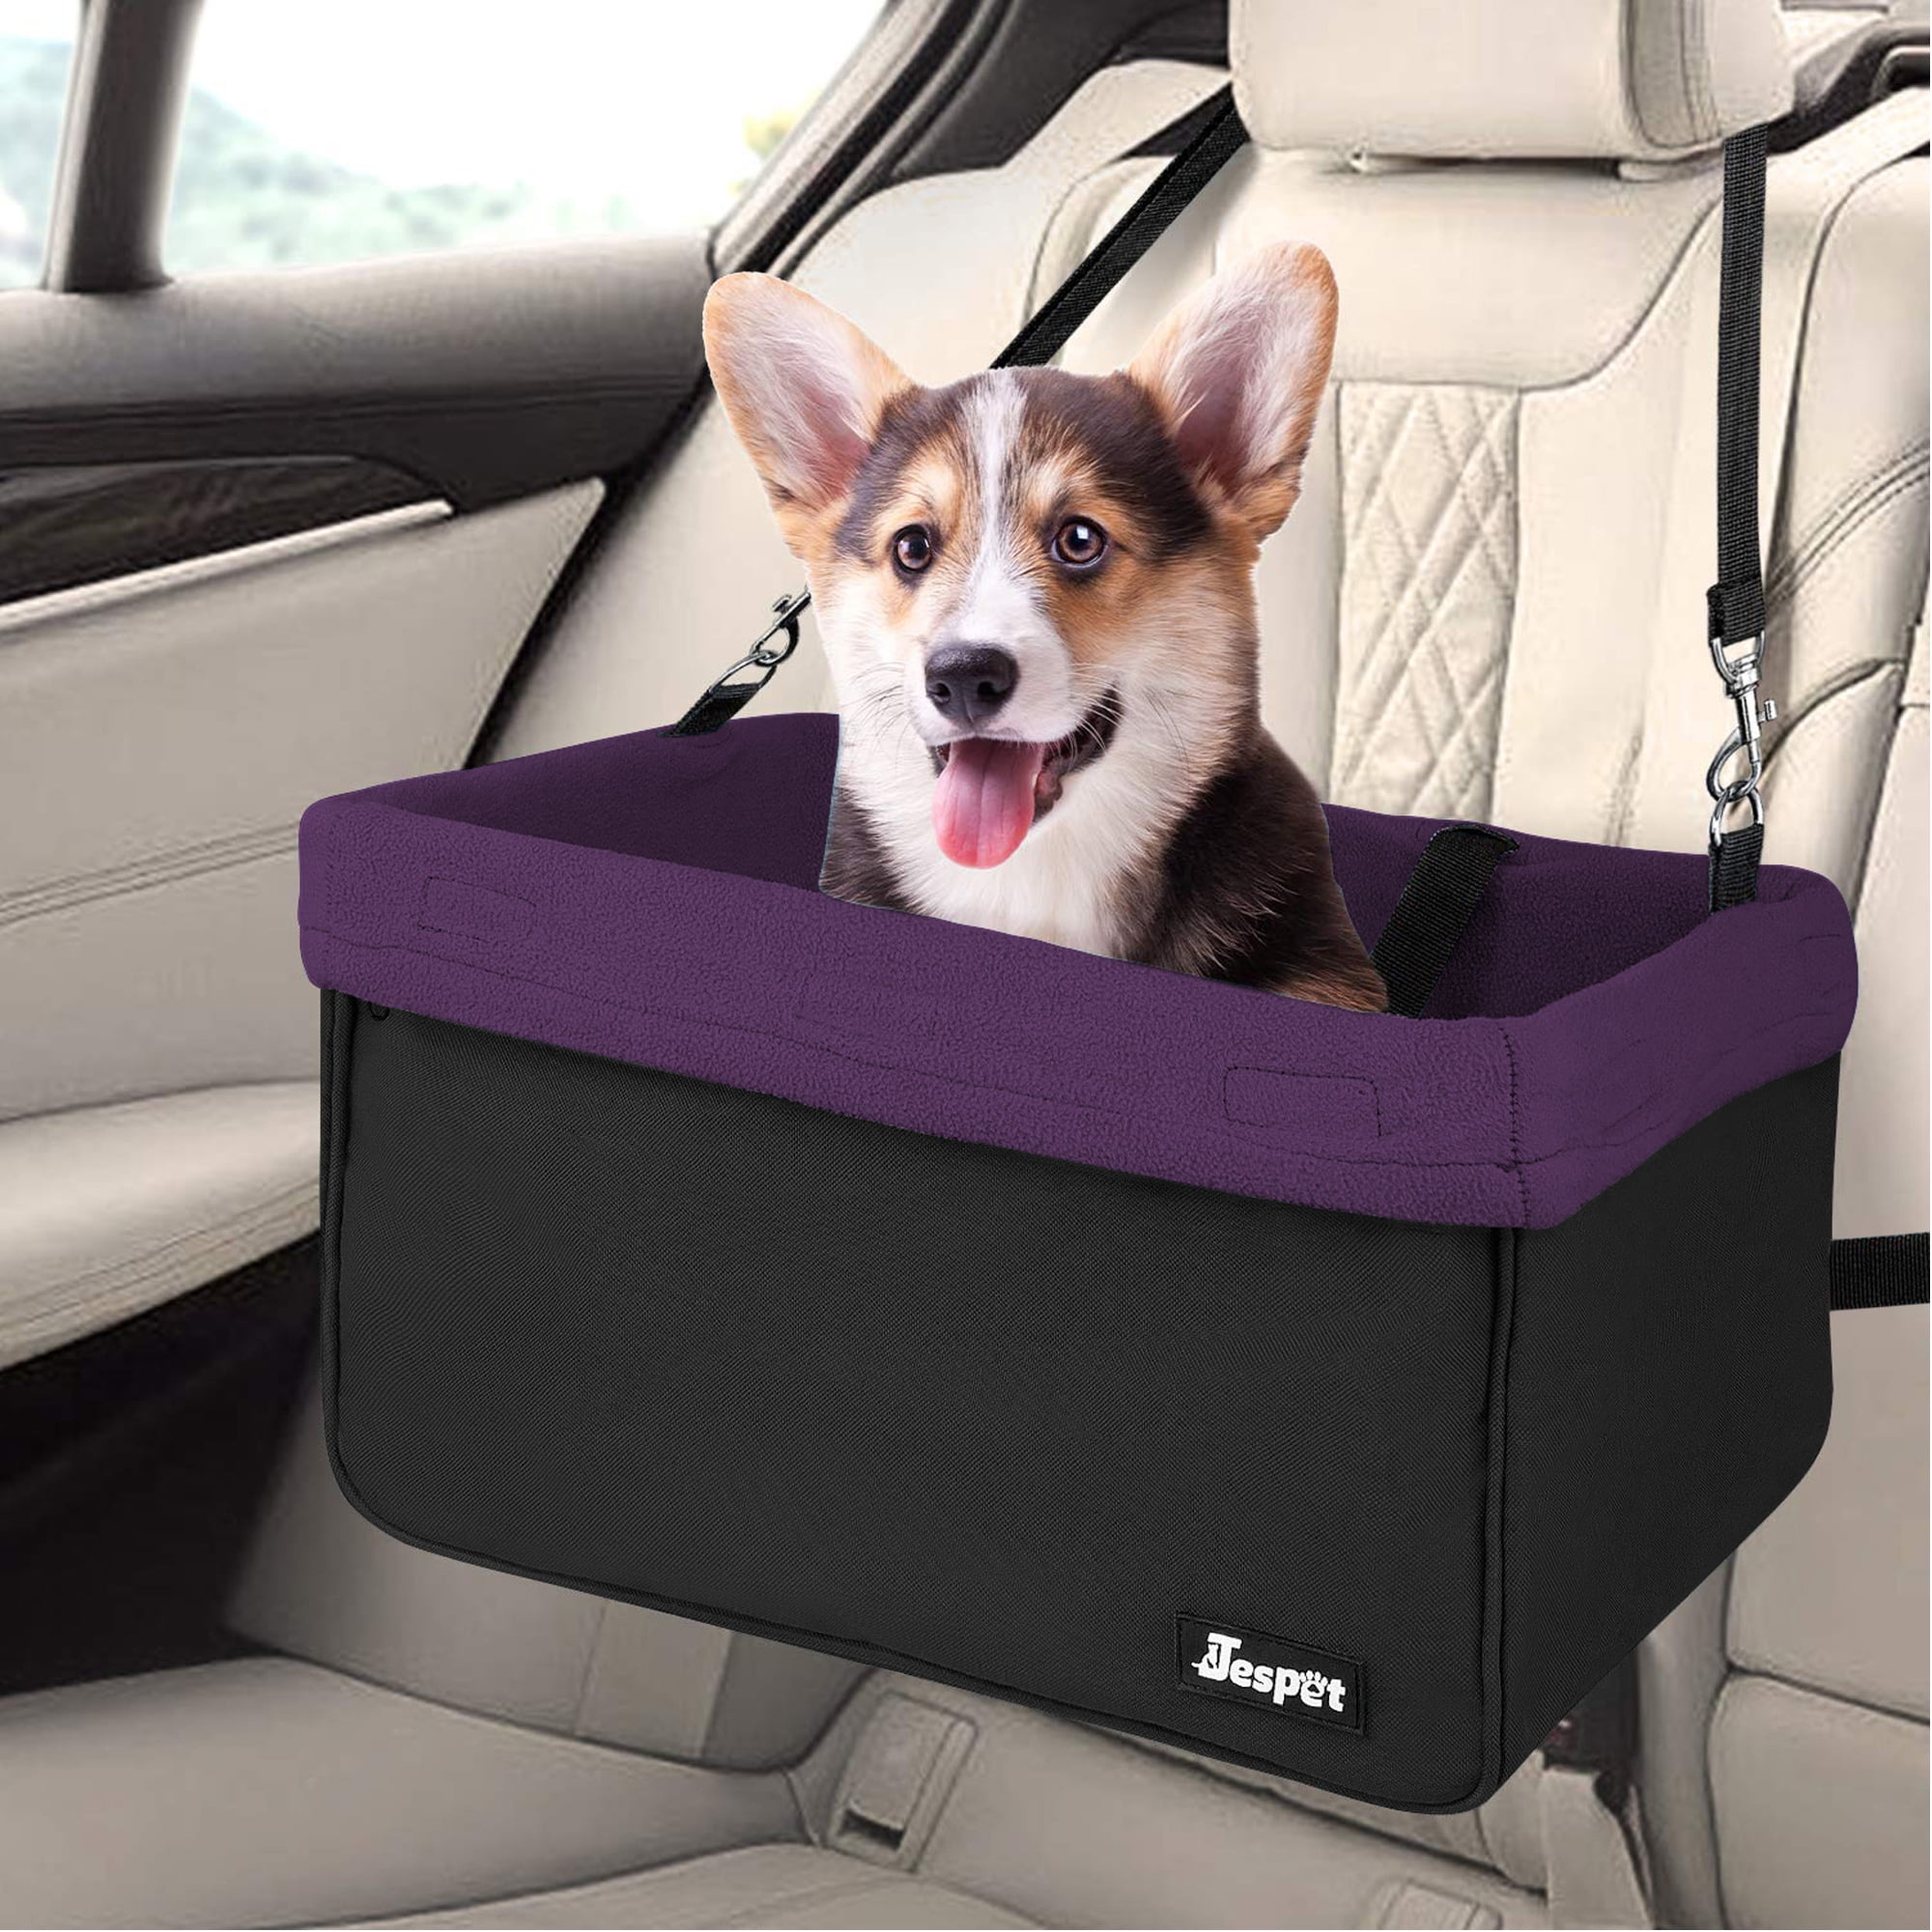 Generic erproof Coverble Carrier Carrier Booster Pet Dog Car Seat Supplies Travel Portable Waterproof Cover Pet Dog Car T